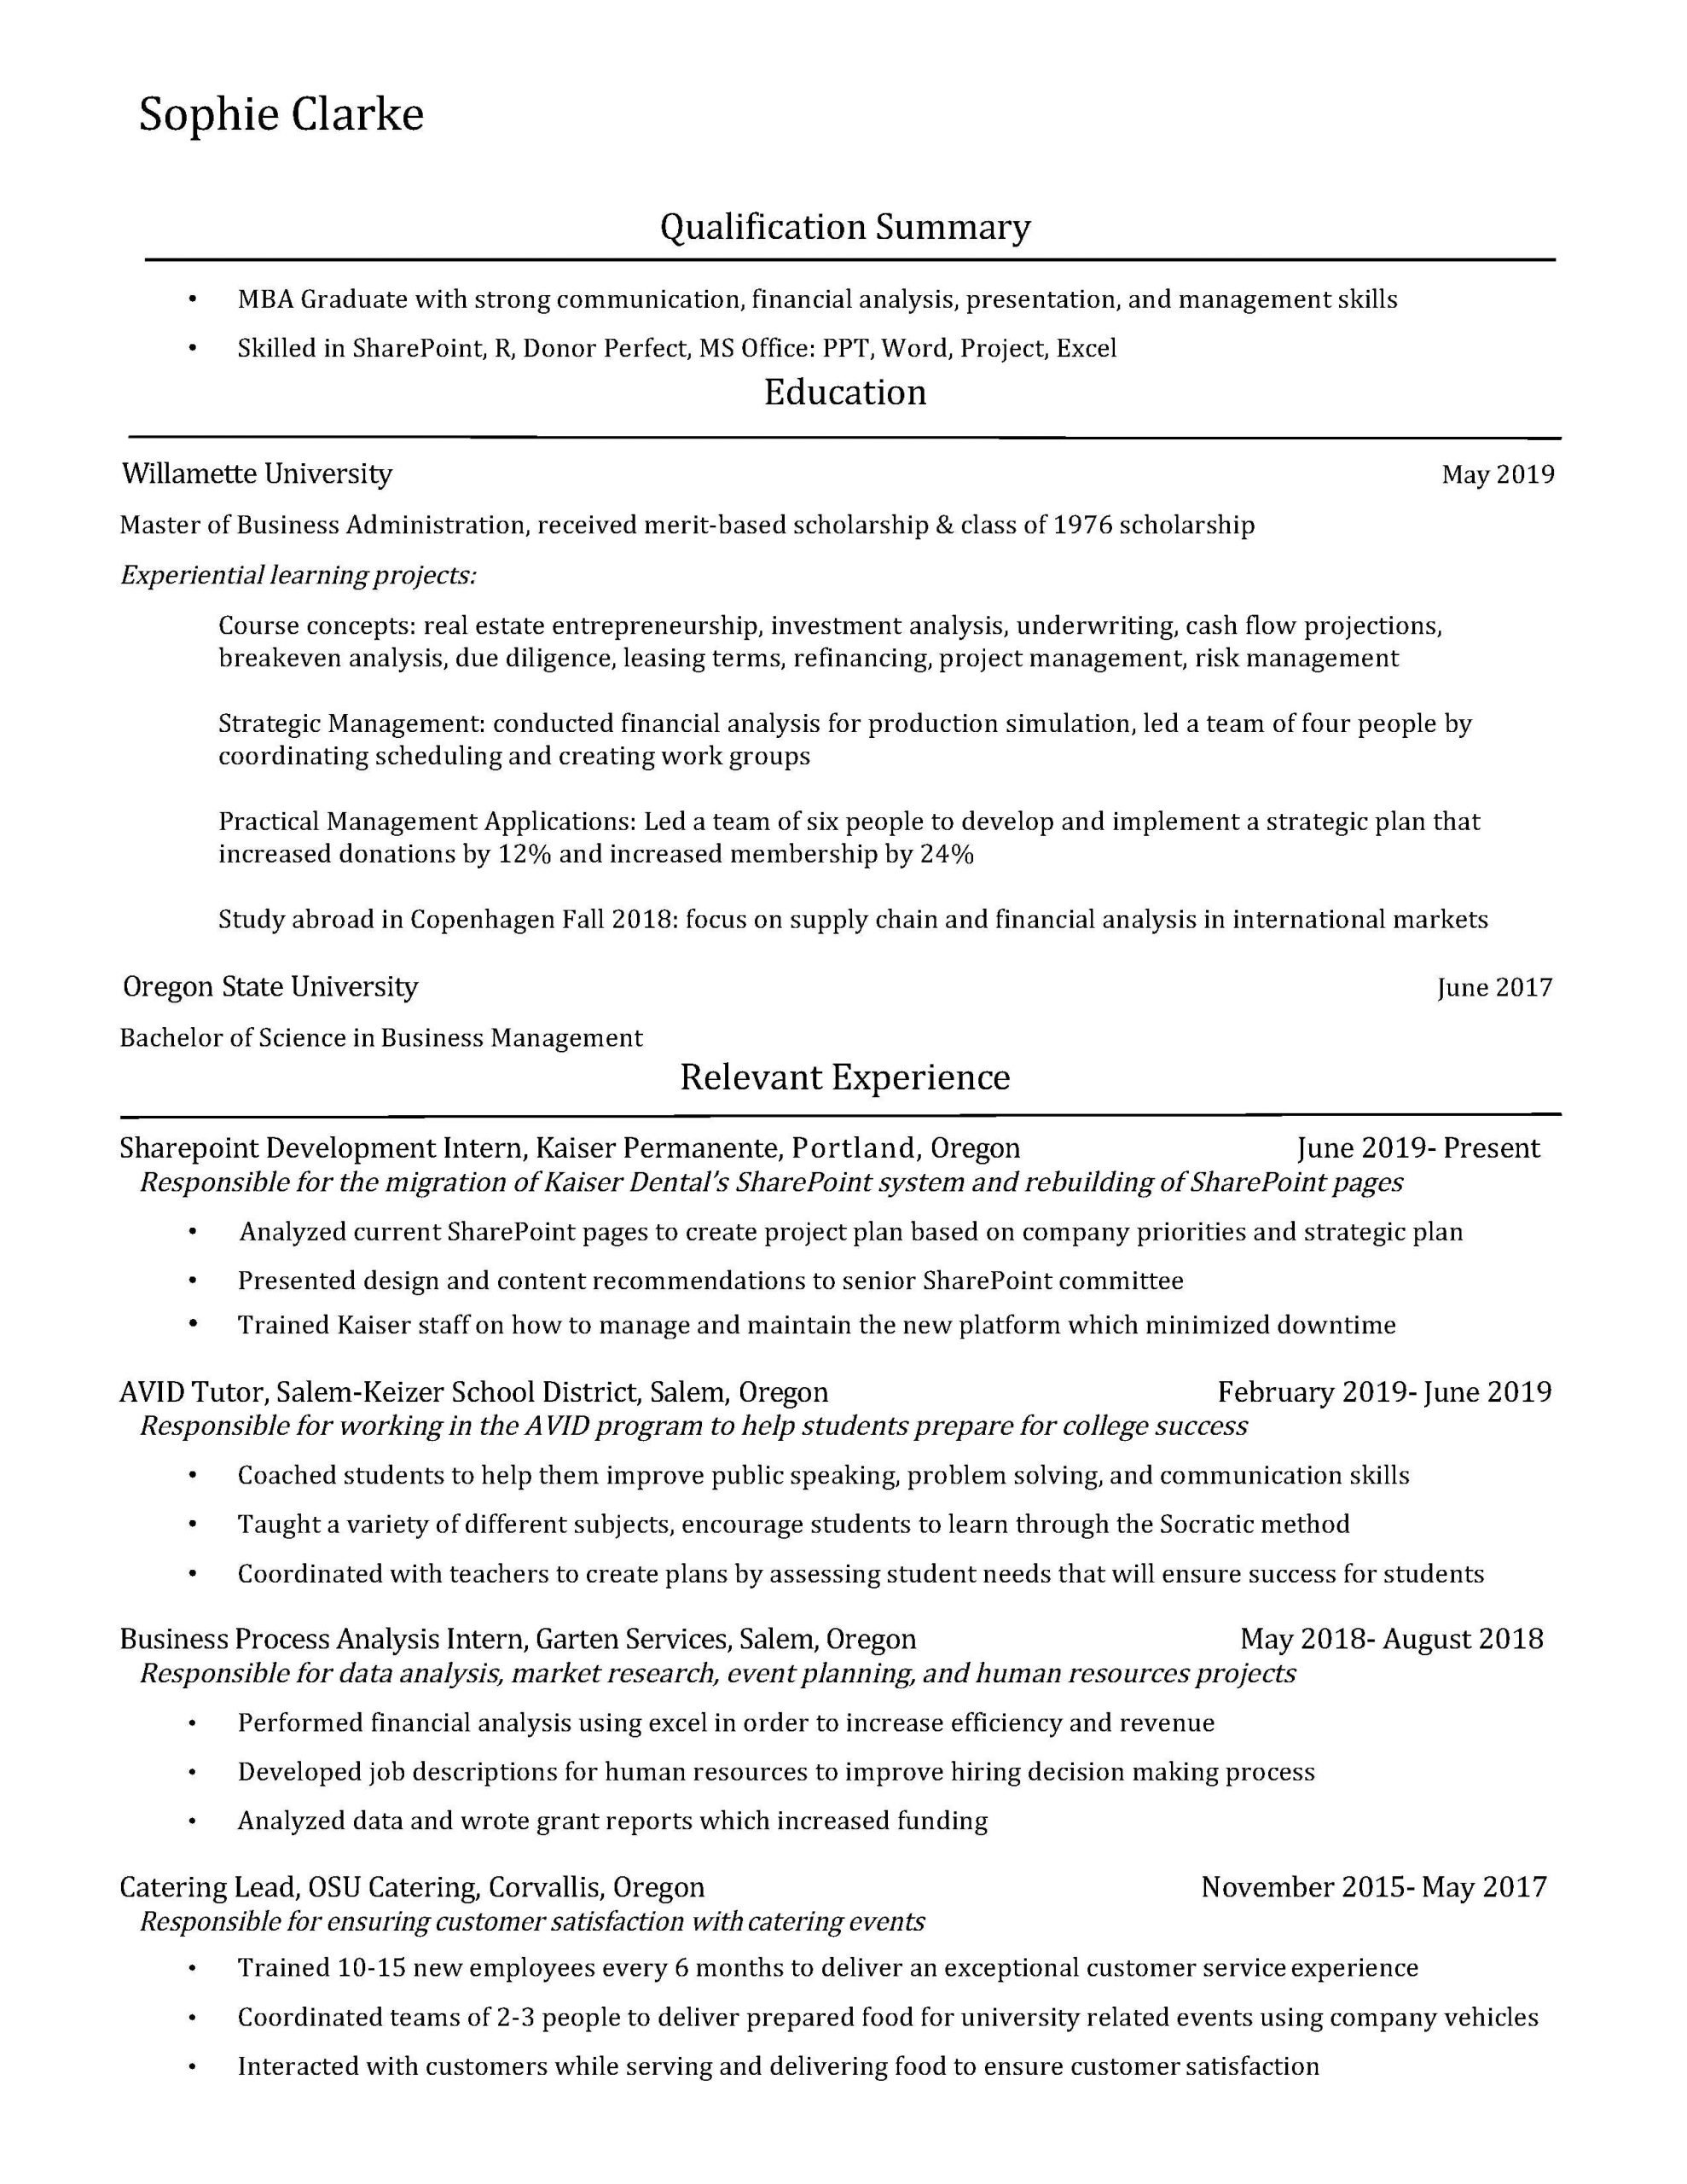 What can I do to improve my resume? : resumes